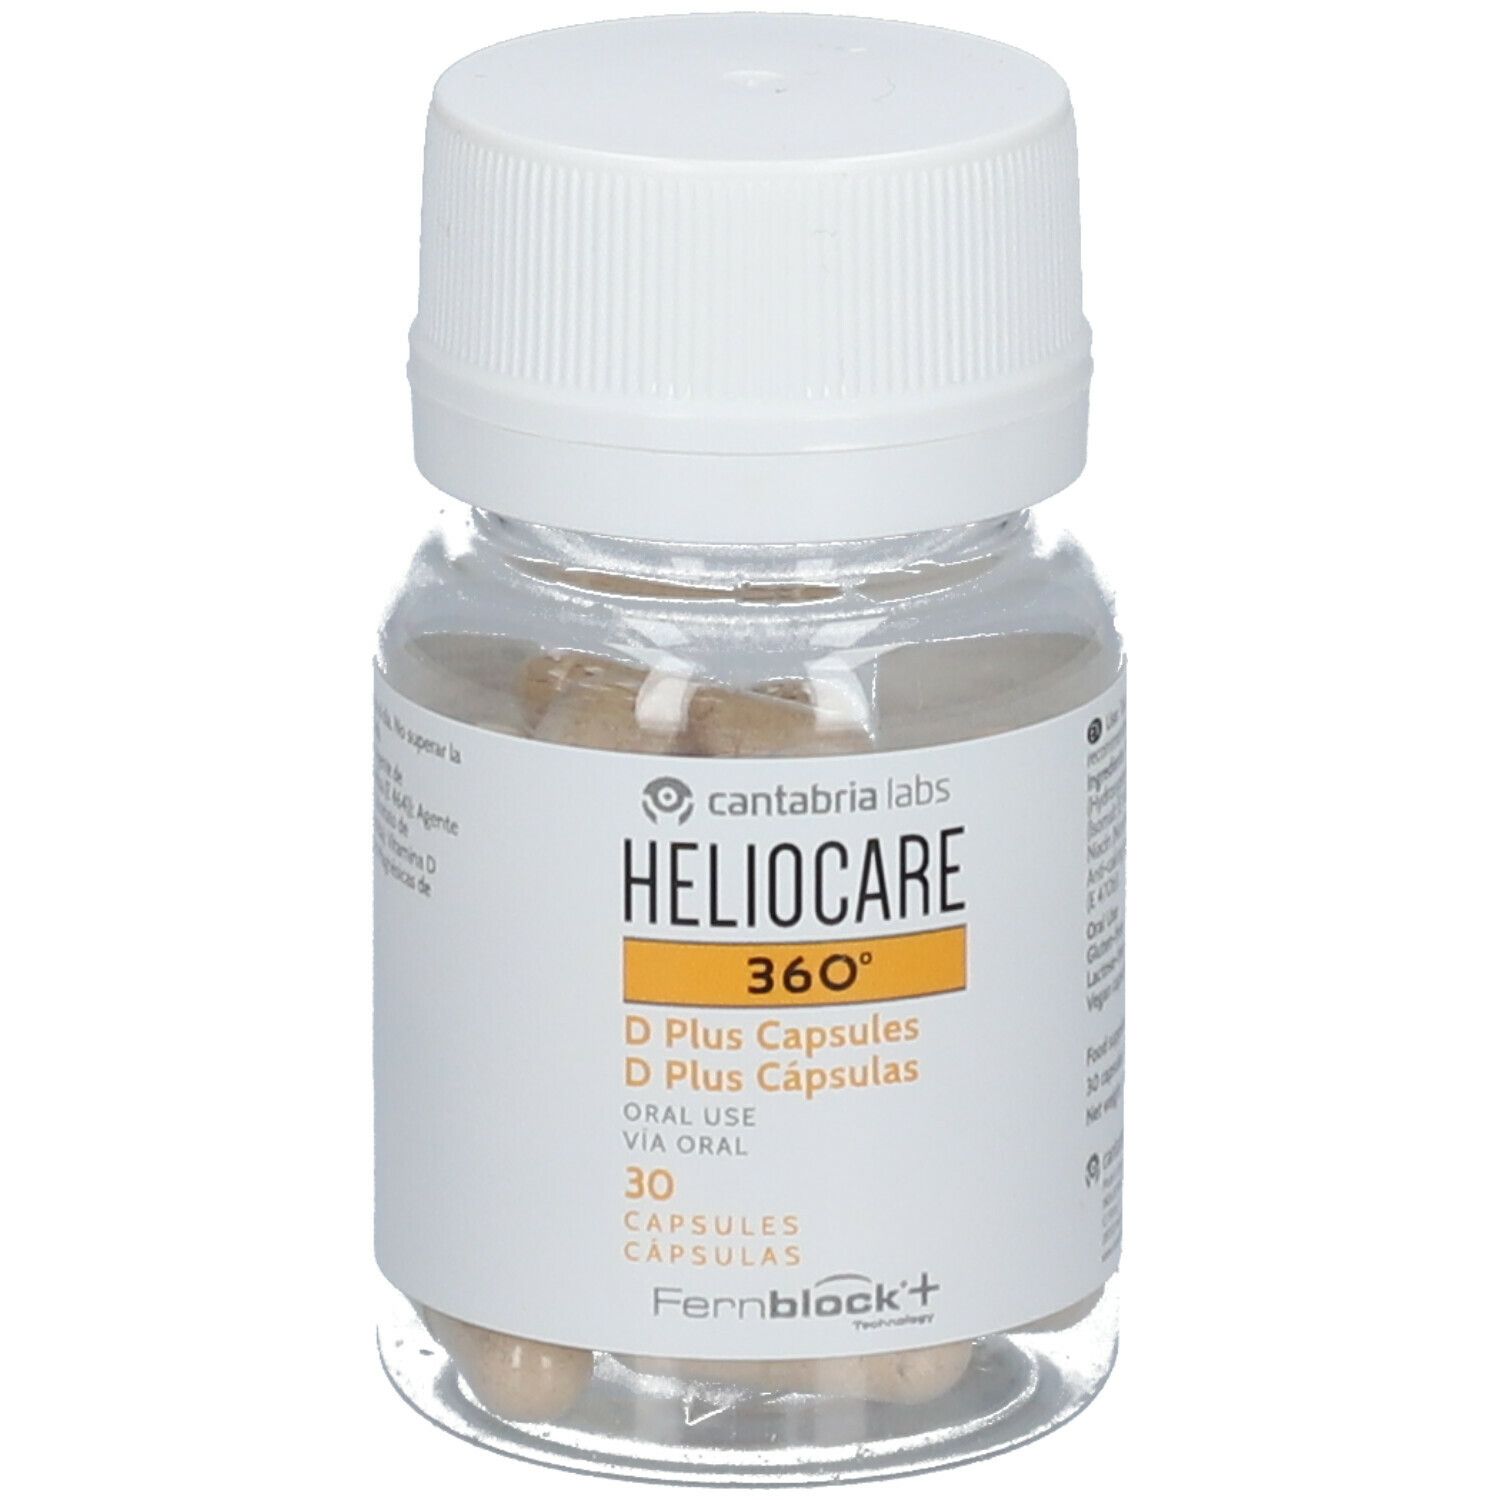 Cantabria Labs Heliocare 360° D Plus